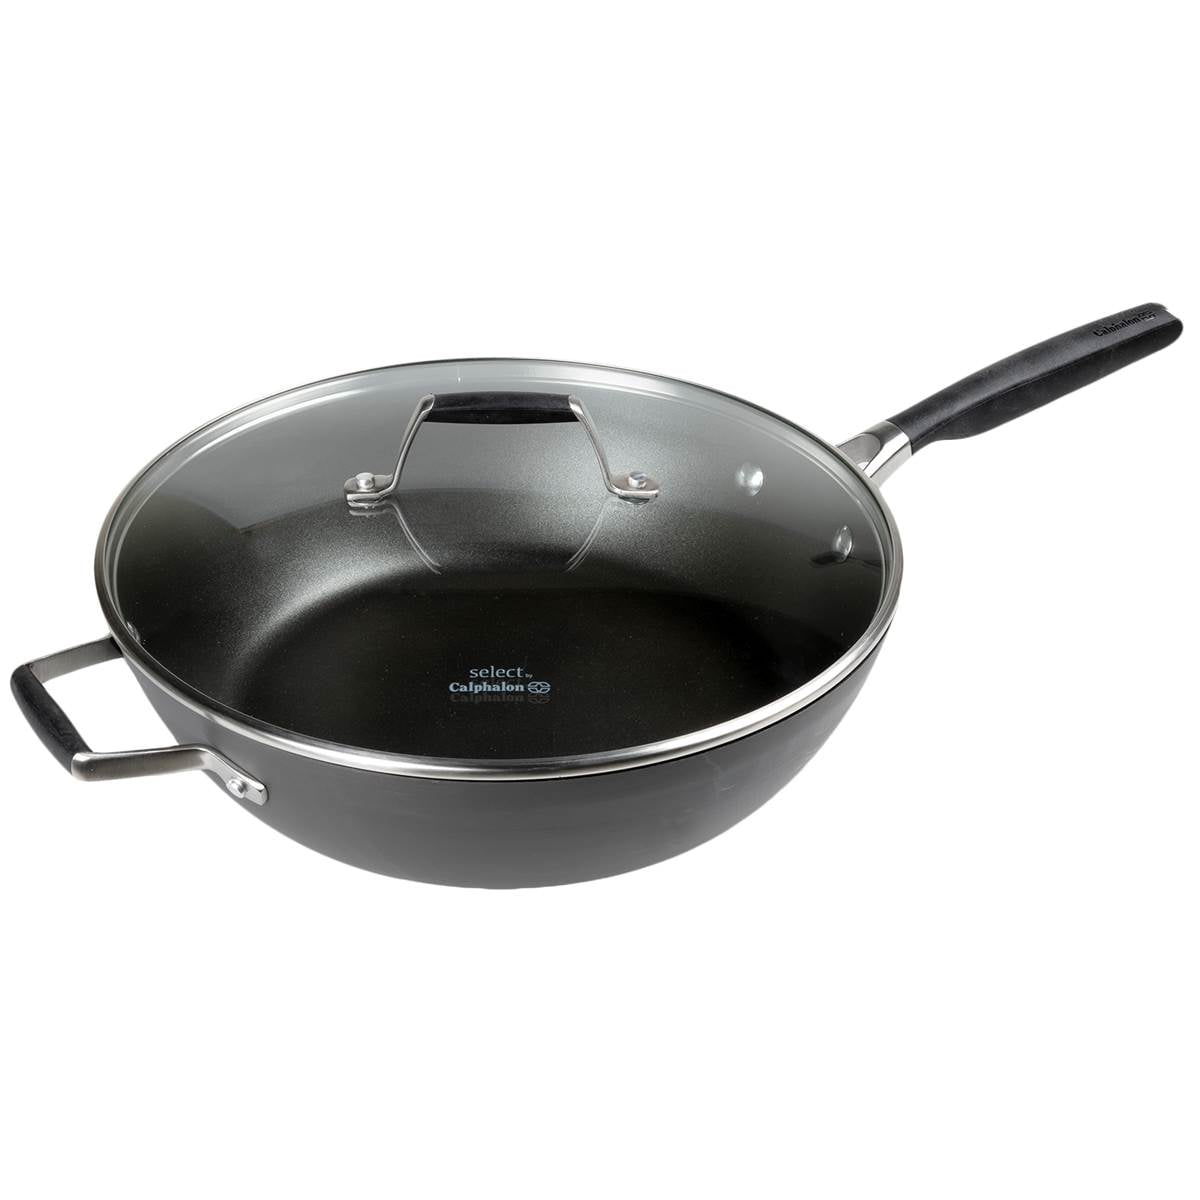 Circulon Radiance Hard-Anodized Nonstick Covered Deep Skillet, 12 